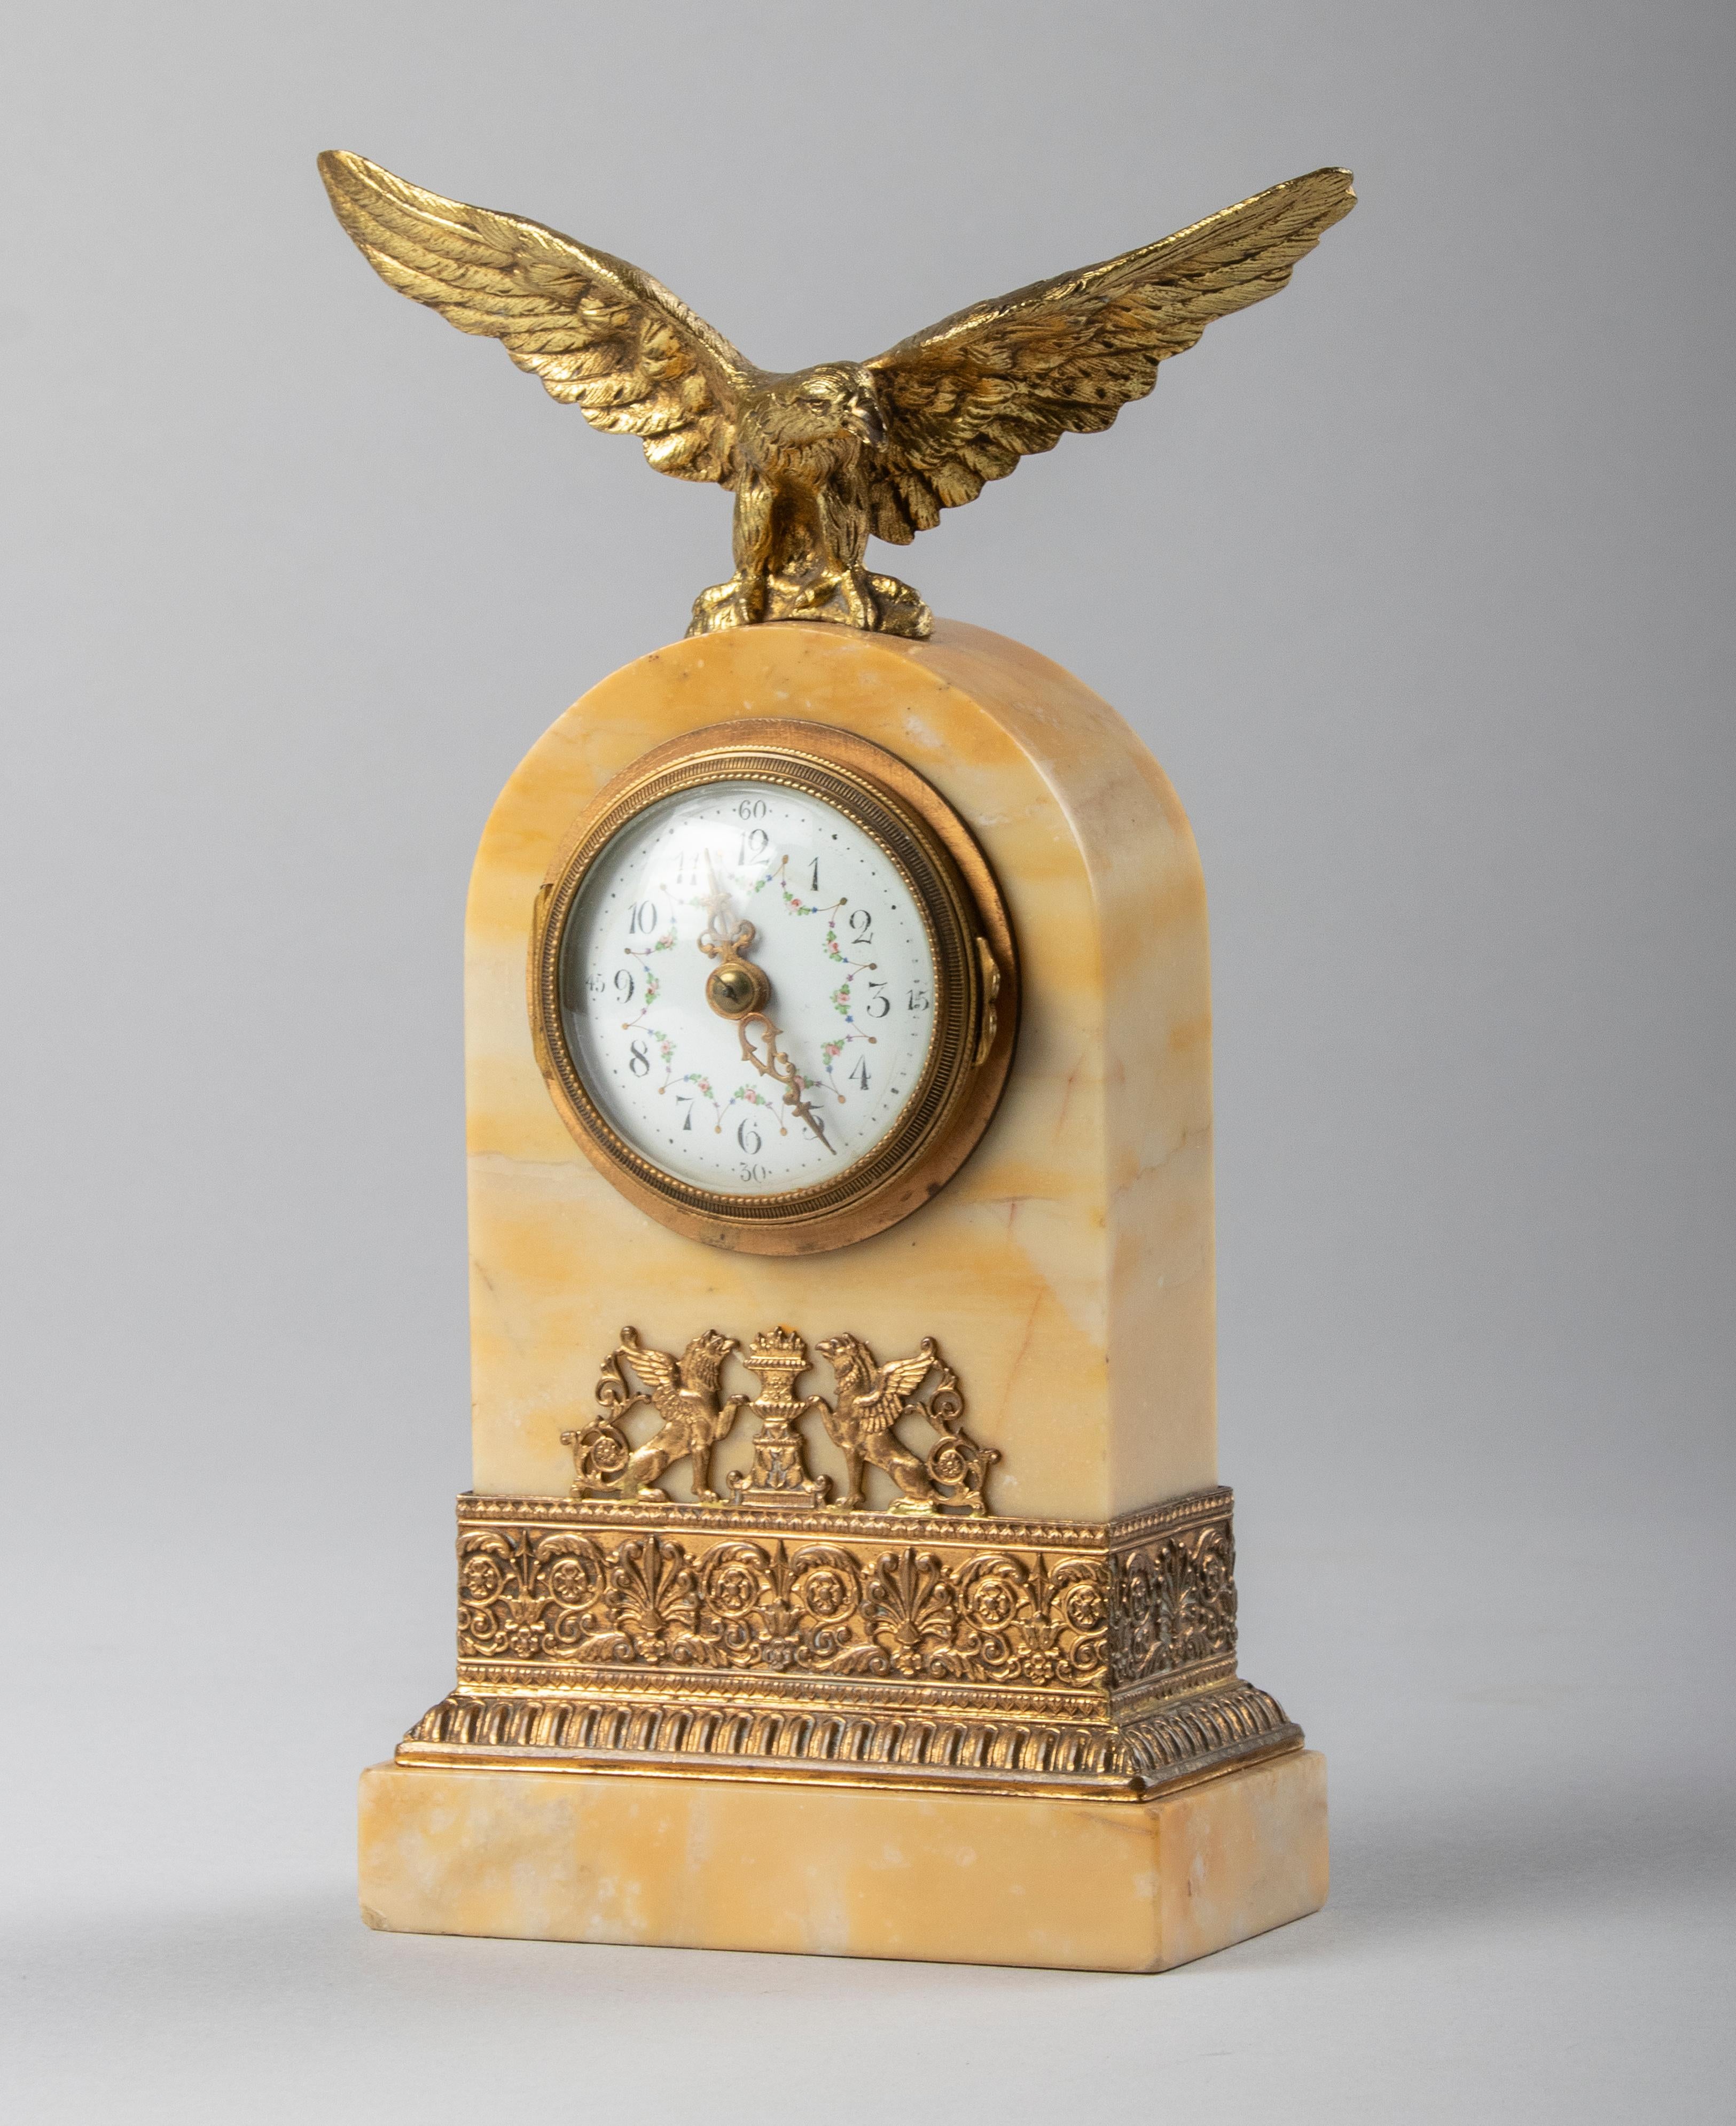 Am Empire style small travel clock. The case is made of Siena marble with on top an imperial bronze eagle which was the symbol of the first and second Empire period. The marble case all around embellished wit gilt copper. The enameled dial have hand